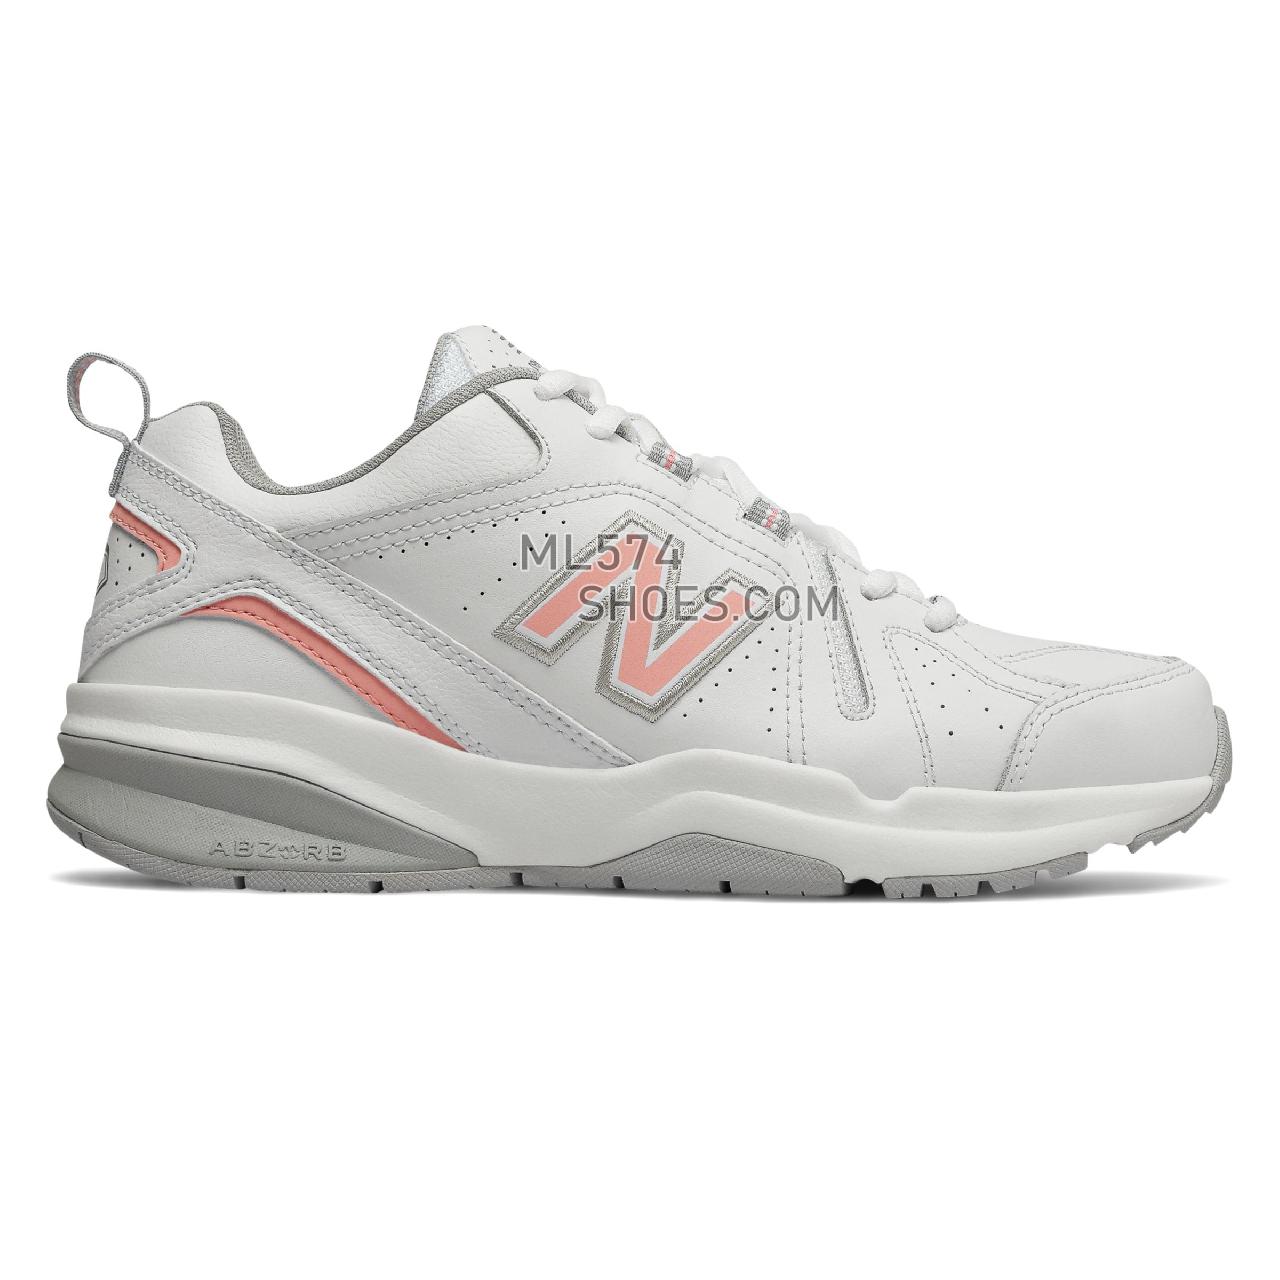 New Balance 608v5 - Women's Everyday Trainers - White with Pink - WX608WP5